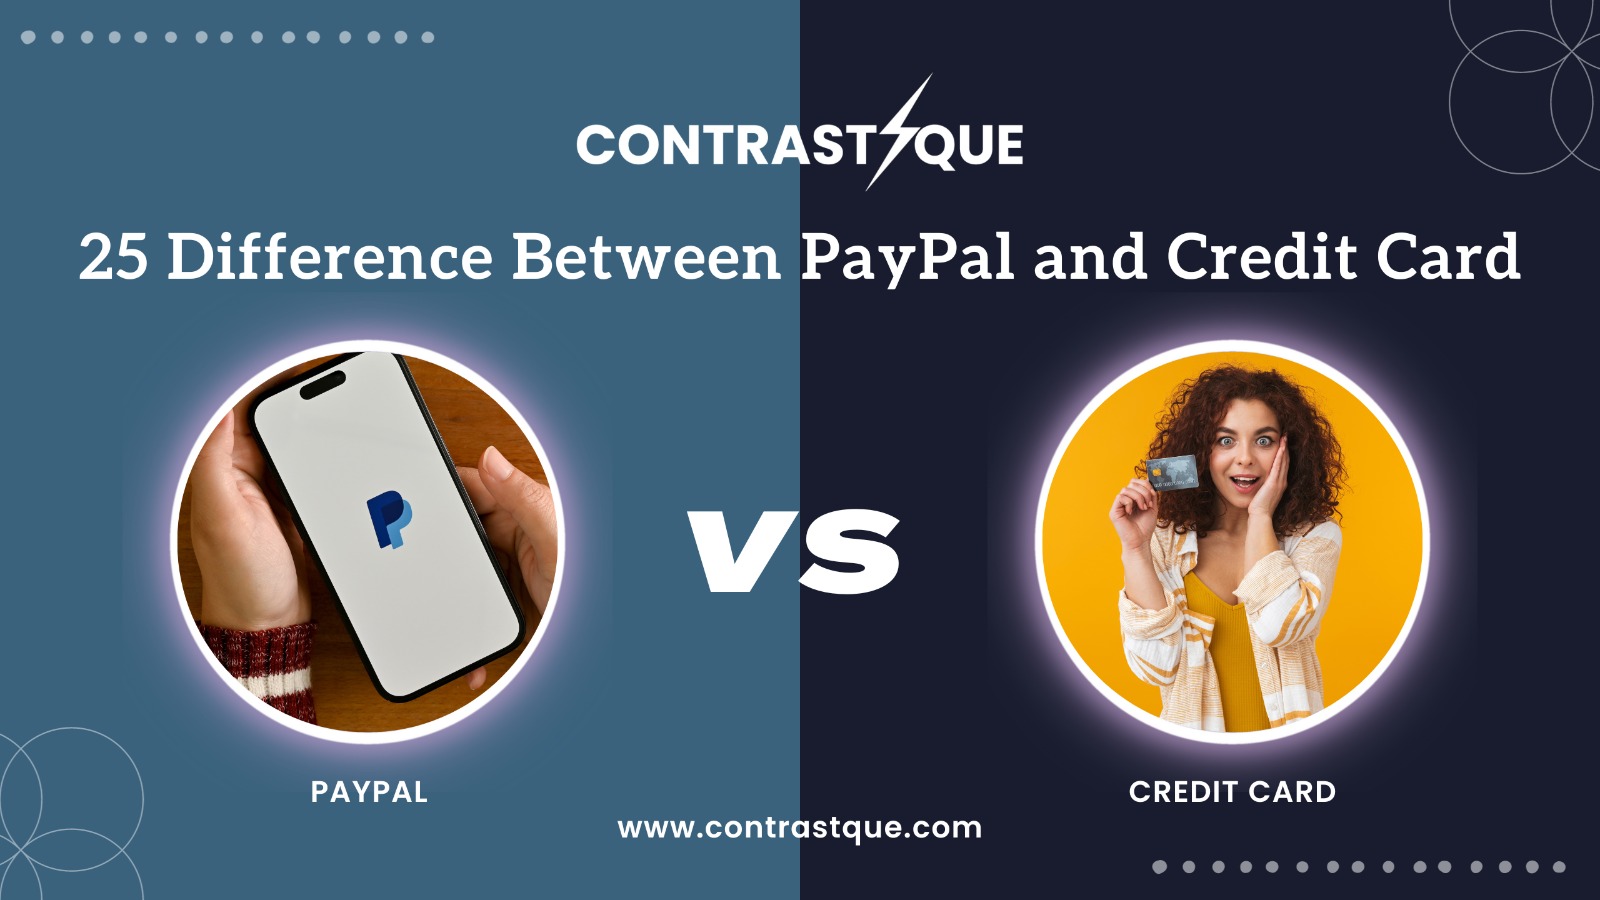 25 Difference Between PayPal and Credit Card